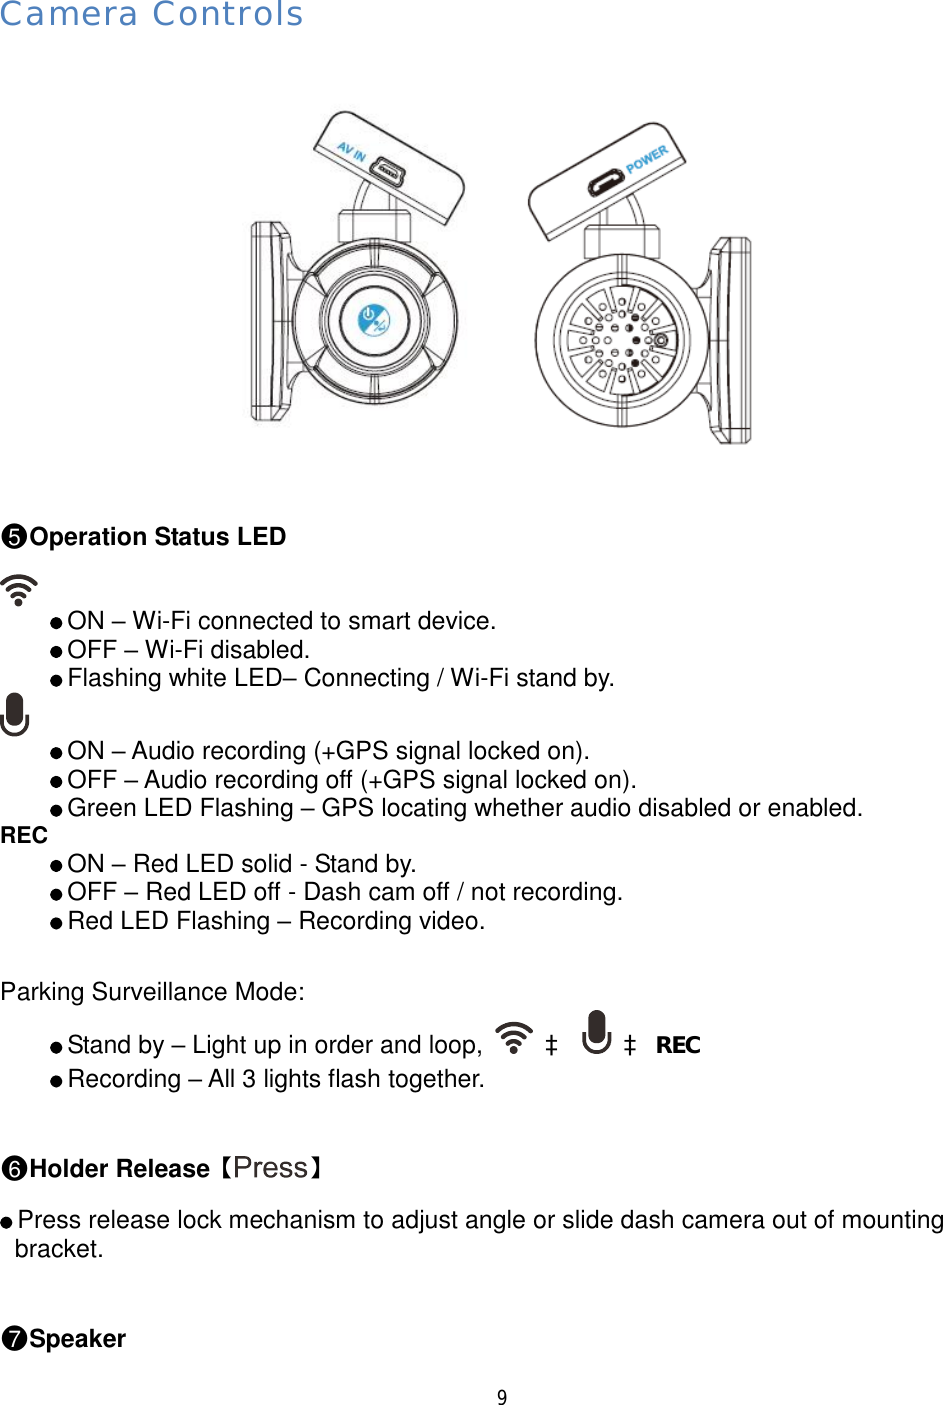  9  Camera Controls  ●5Operation Status LED    ON – Wi-Fi connected to smart device.    OFF – Wi-Fi disabled.   Flashing white LED– Connecting / Wi-Fi stand by.    ON – Audio recording (+GPS signal locked on).    OFF – Audio recording off (+GPS signal locked on).    Green LED Flashing – GPS locating whether audio disabled or enabled. REC   ON – Red LED solid - Stand by.   OFF – Red LED off - Dash cam off / not recording.   Red LED Flashing – Recording video.  Parking Surveillance Mode:   Stand by – Light up in order and loop,    à    à REC   Recording – All 3 lights flash together.  ●6Holder Release【 】   Press release lock mechanism to adjust angle or slide dash camera out of mounting bracket.  ●7Speaker